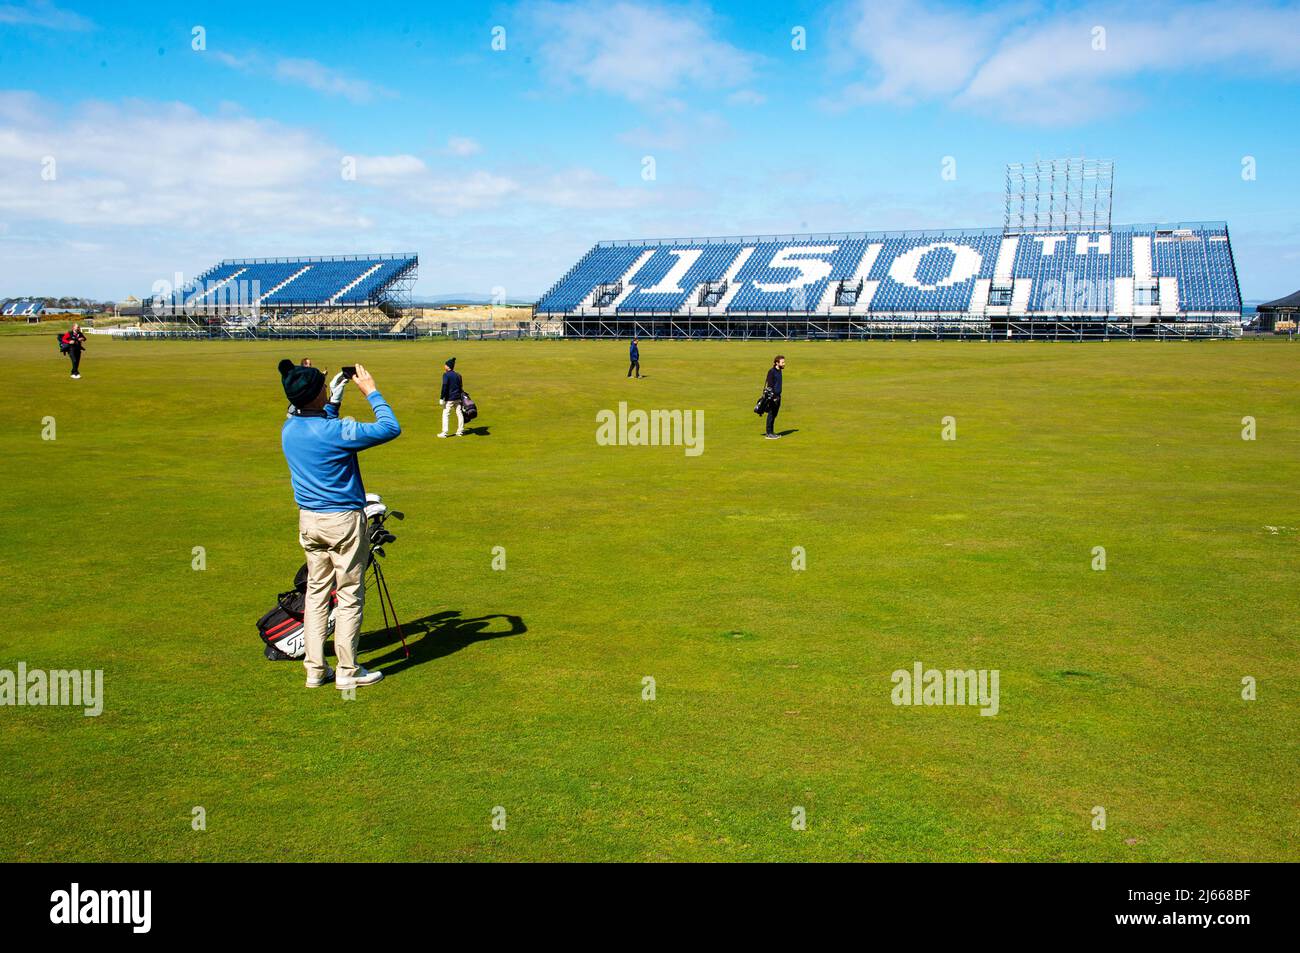 Temporary stands overlooking the 1st and 18th fairway of the Old Course, which will host the 150th Open Golf tournament at St Andrews in July 2022. Stock Photo